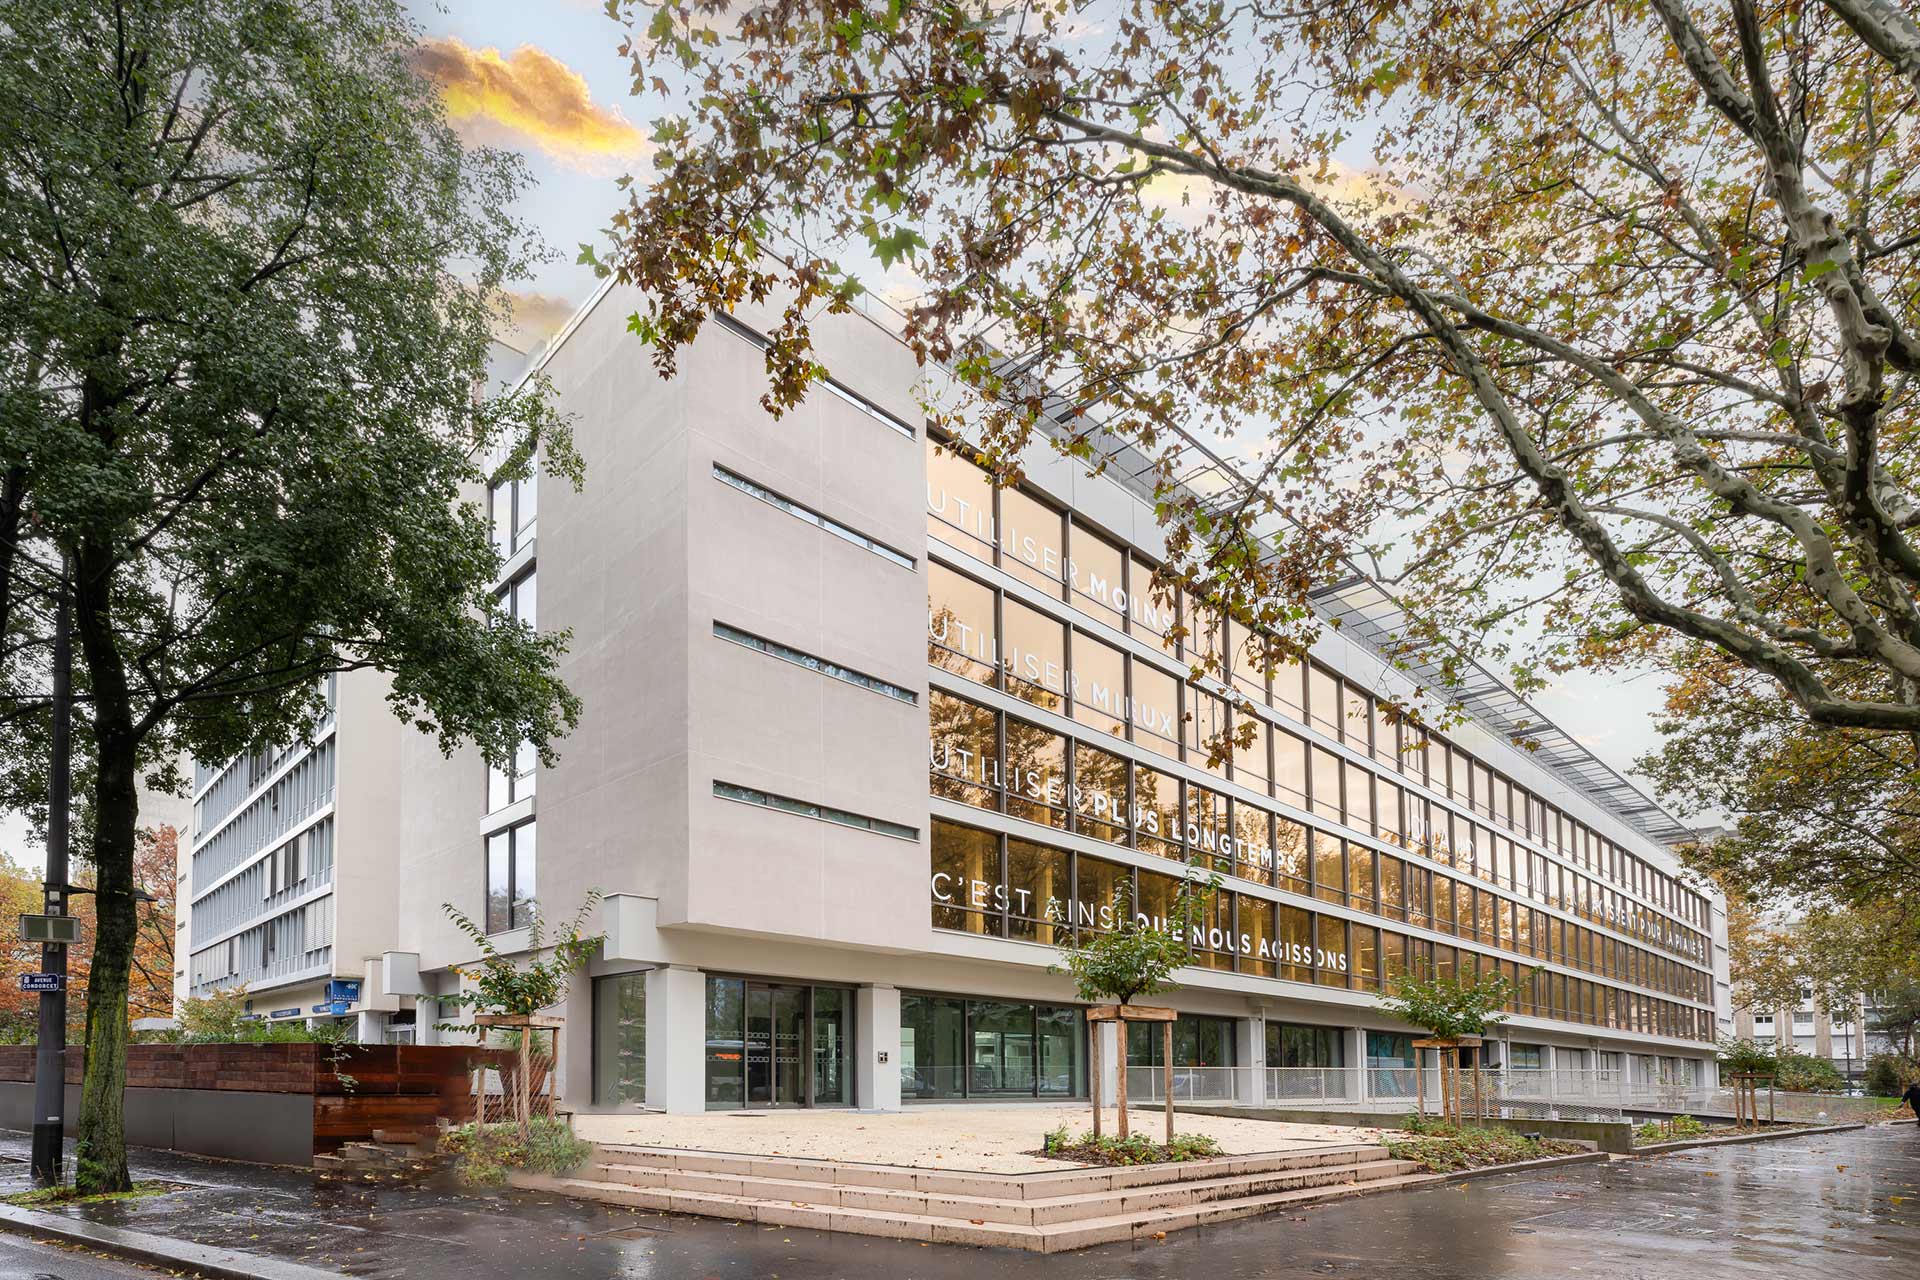 Exterior view of the GlassDoor building in Villeurbanne, which will house MATERI'ACT's decision-making center and R&D laboratory from August 2023.